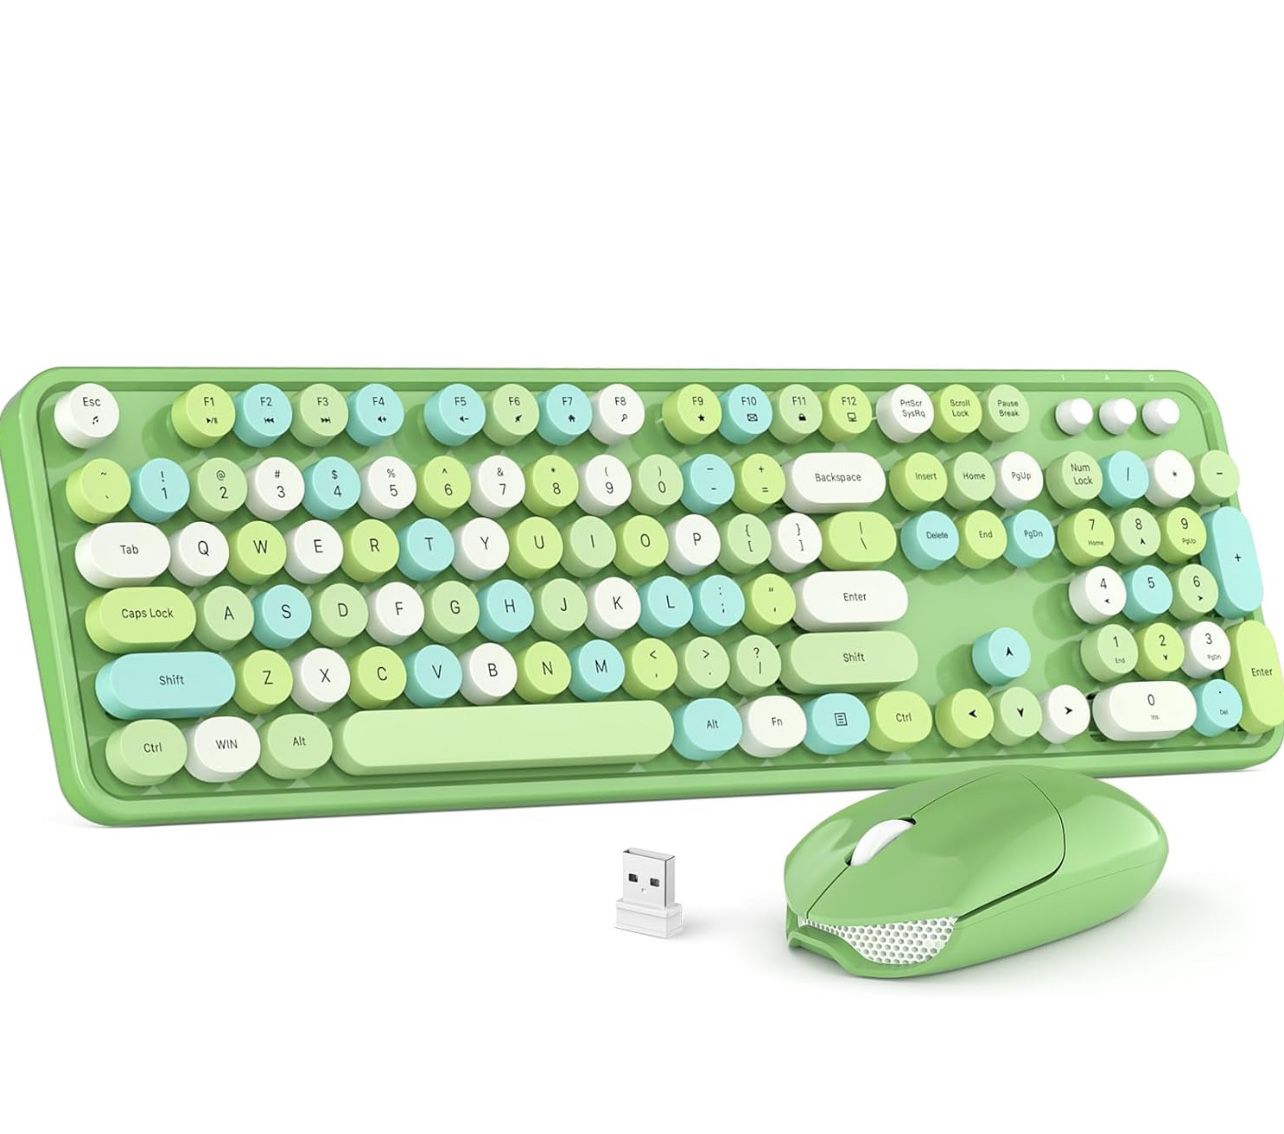 Wireless Keyboard and Mouse Combo, MOWUX Colorful Computer Full Size 2.4G Plug and Play Wireless Typewriter Keyboard and Mouse Set for Windows, Comput